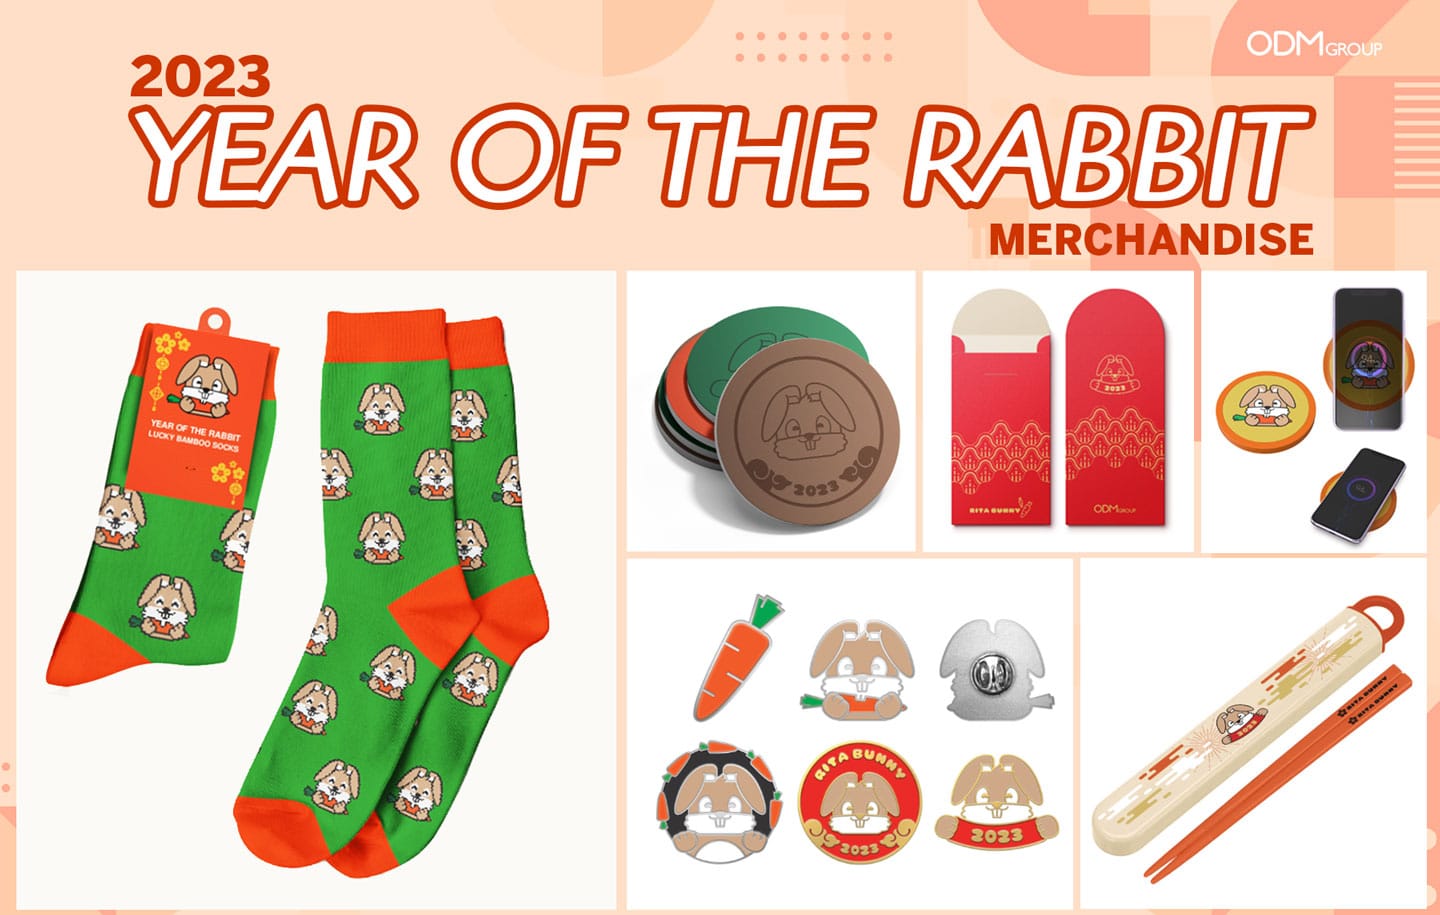 The Best Lunar New Year Gifts for the Year of the Rabbit